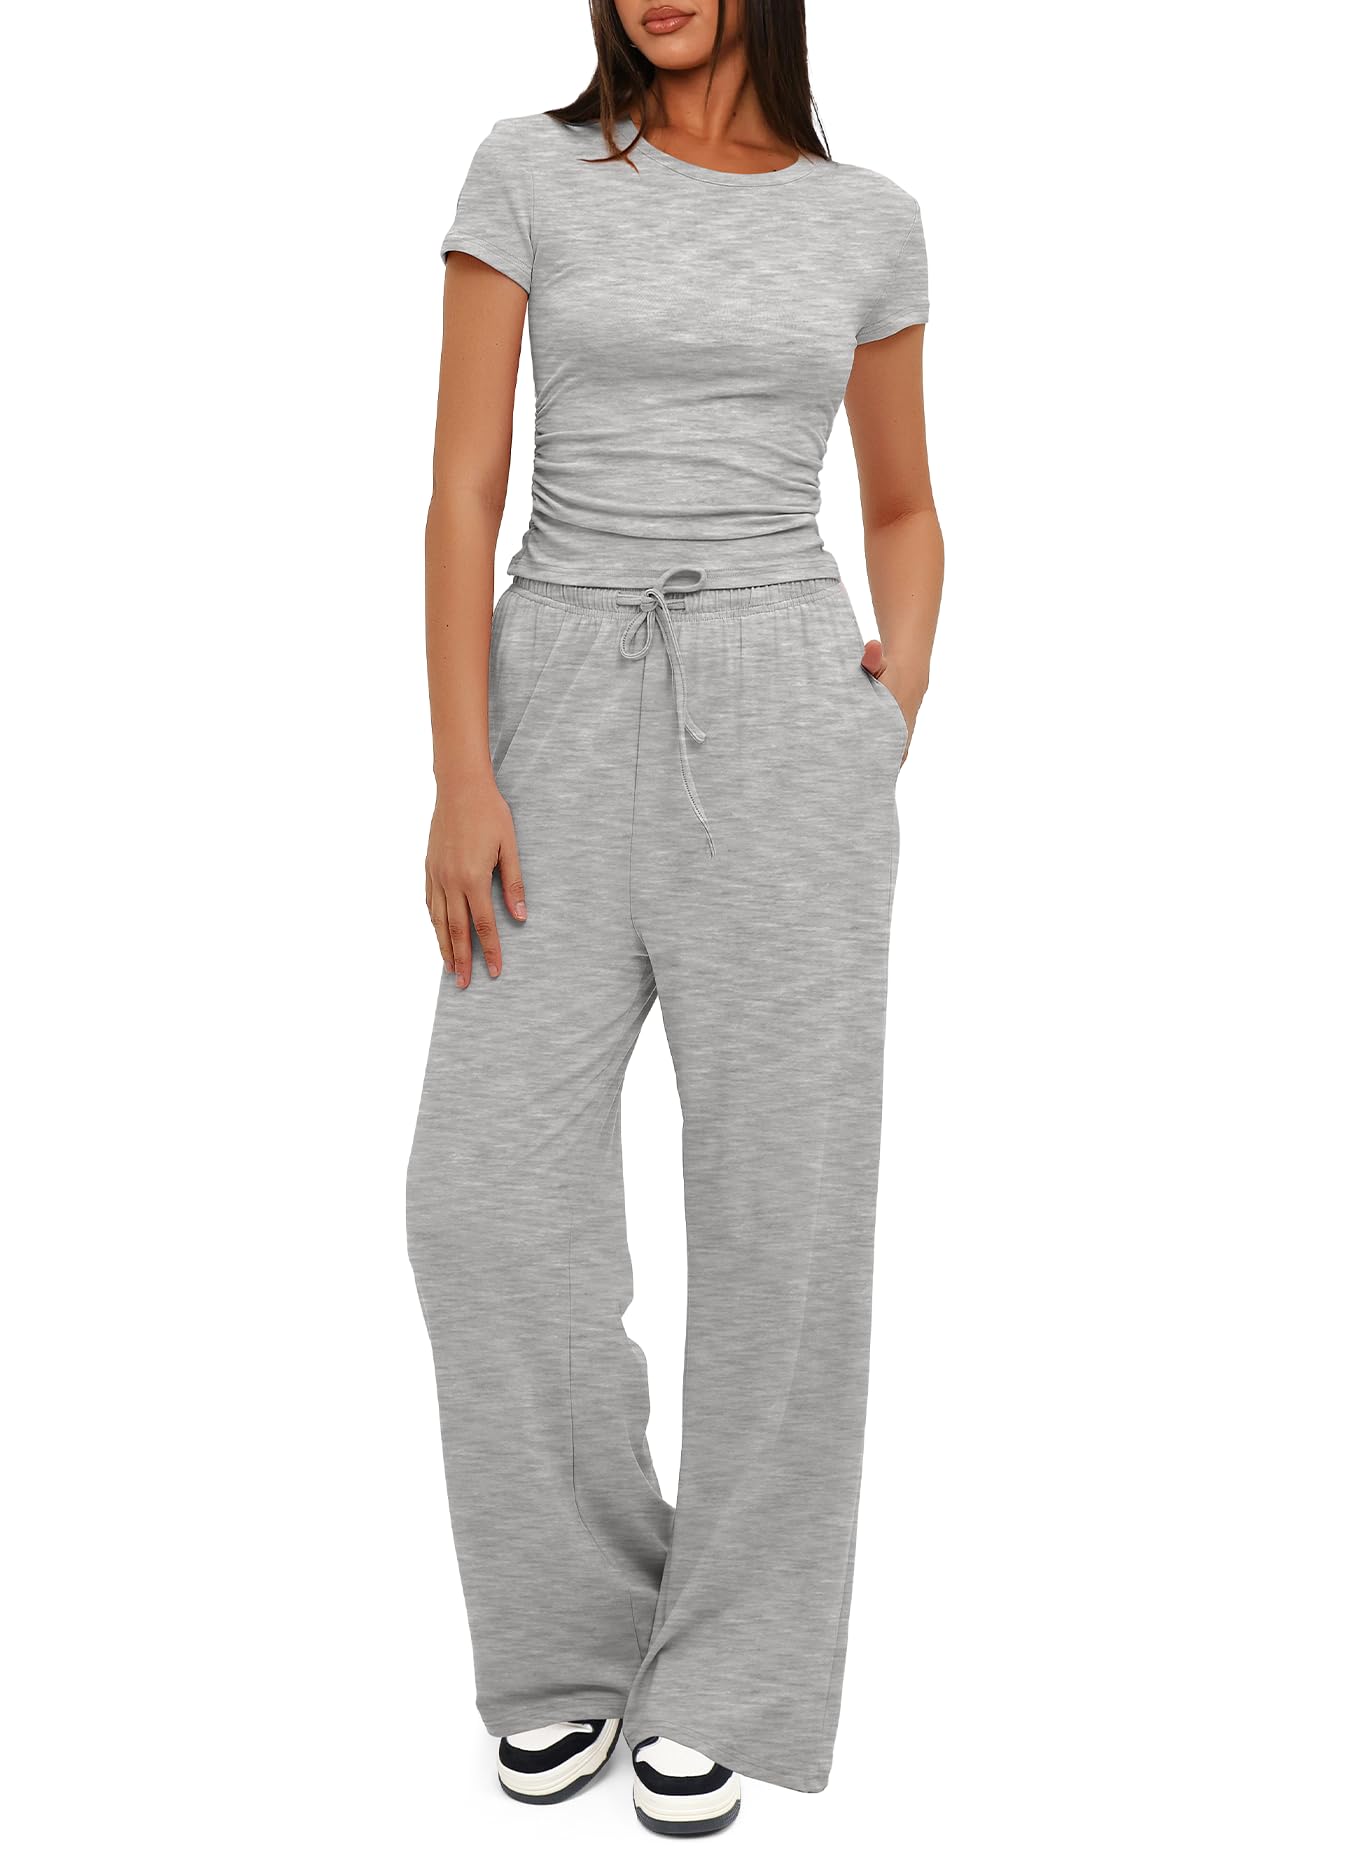 Women's Ruched Short Sleeve Tops and High Waisted Wide Leg Pants  Sets